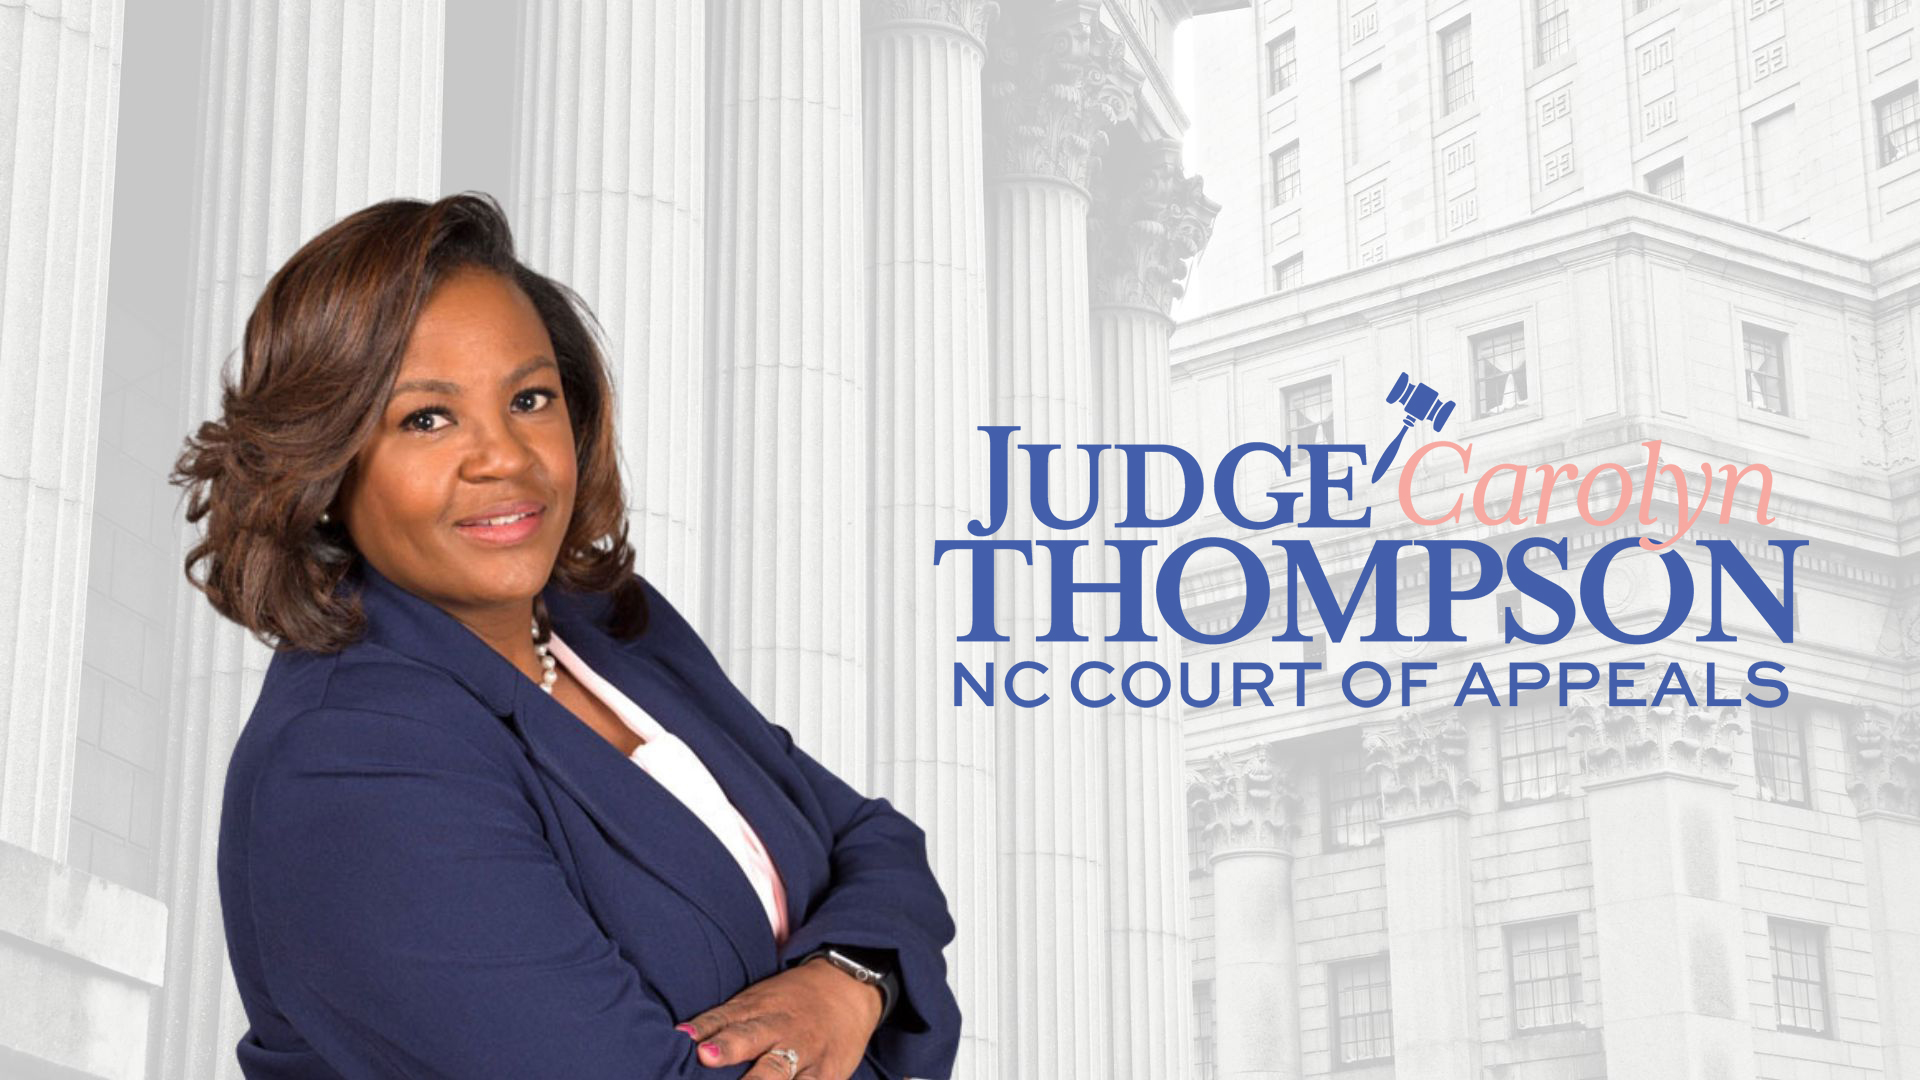 Judge Carolyn J. Thompson for NC Court of Appeals